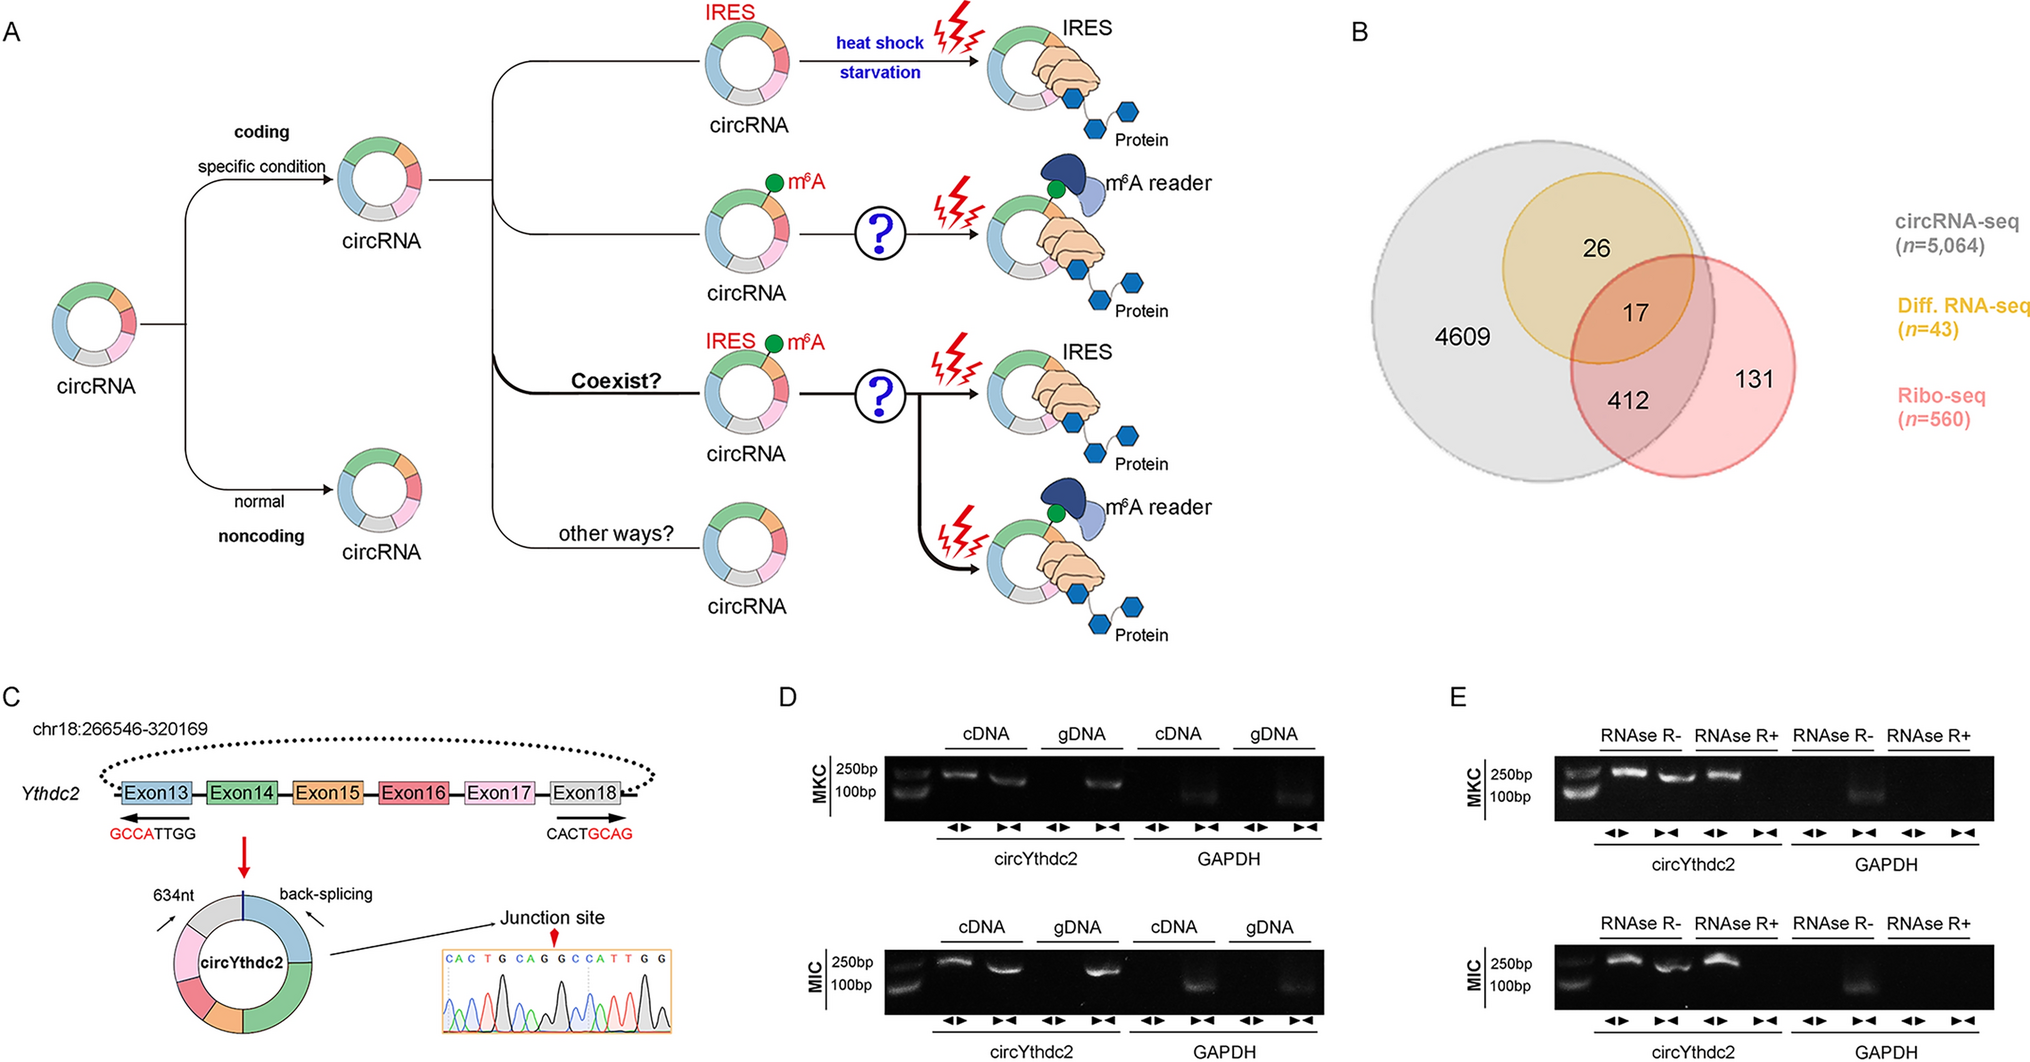 CircYthdc2 generates polypeptides through two translation strategies to facilitate virus escape